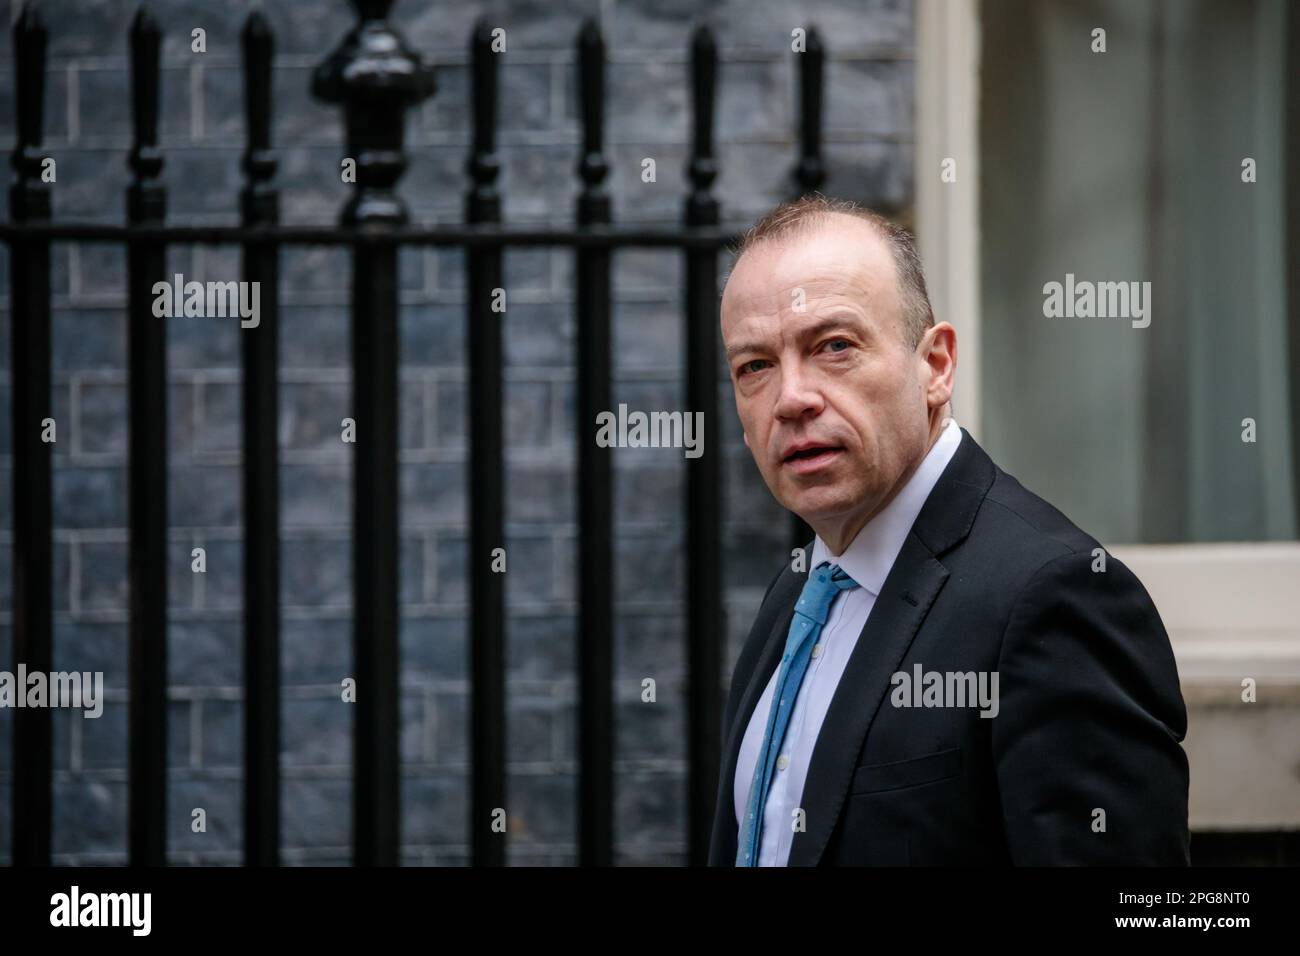 Downing Street, London, UK. 21st March 2023.  Chris Heaton-Harris MP, Secretary of State for Northern Ireland, attends the weekly Cabinet Meeting at 10 Downing Street. Photo by Amanda Rose/Alamy Live News Stock Photo